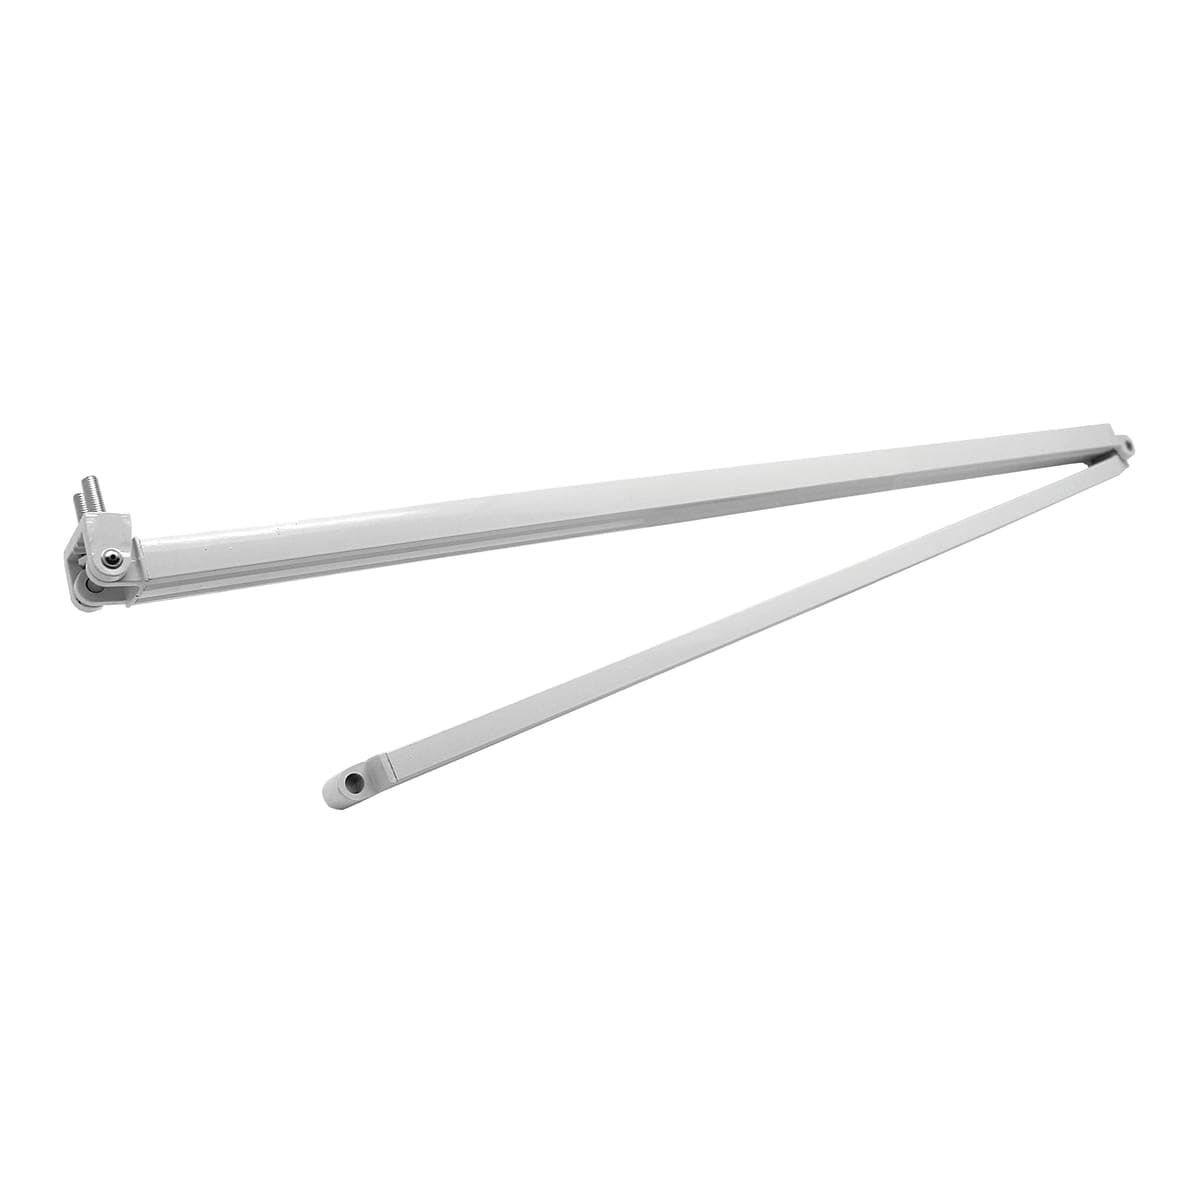 PAIR OF RIGHT/LEFT ARMS FOR BQ AND SEMIC AWNING